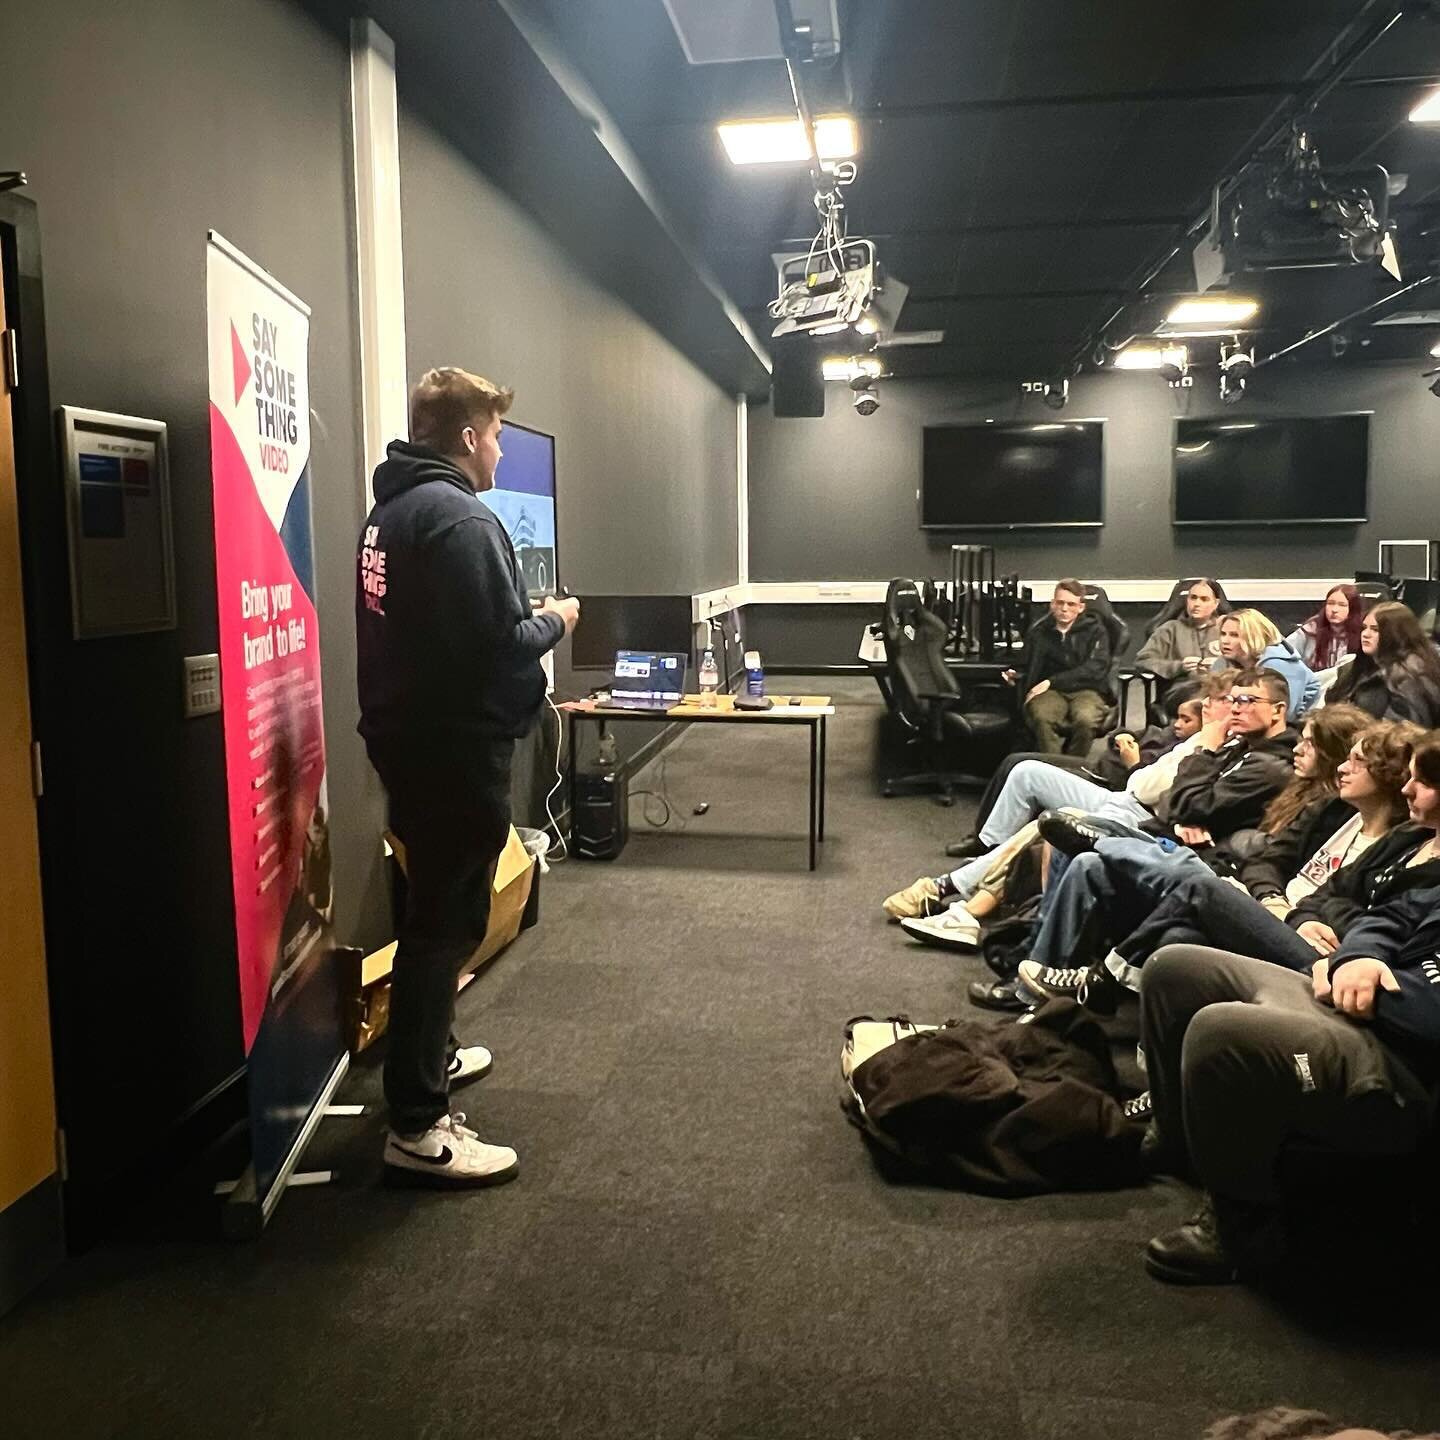 Back to college!

Yesterday I had the privilege talking to the level 3 film students at @northamptoncollege . I spoke to them about starting up a business, and my educational journey. 

It was great to also see @groovemediauk and @visionxm again, giv